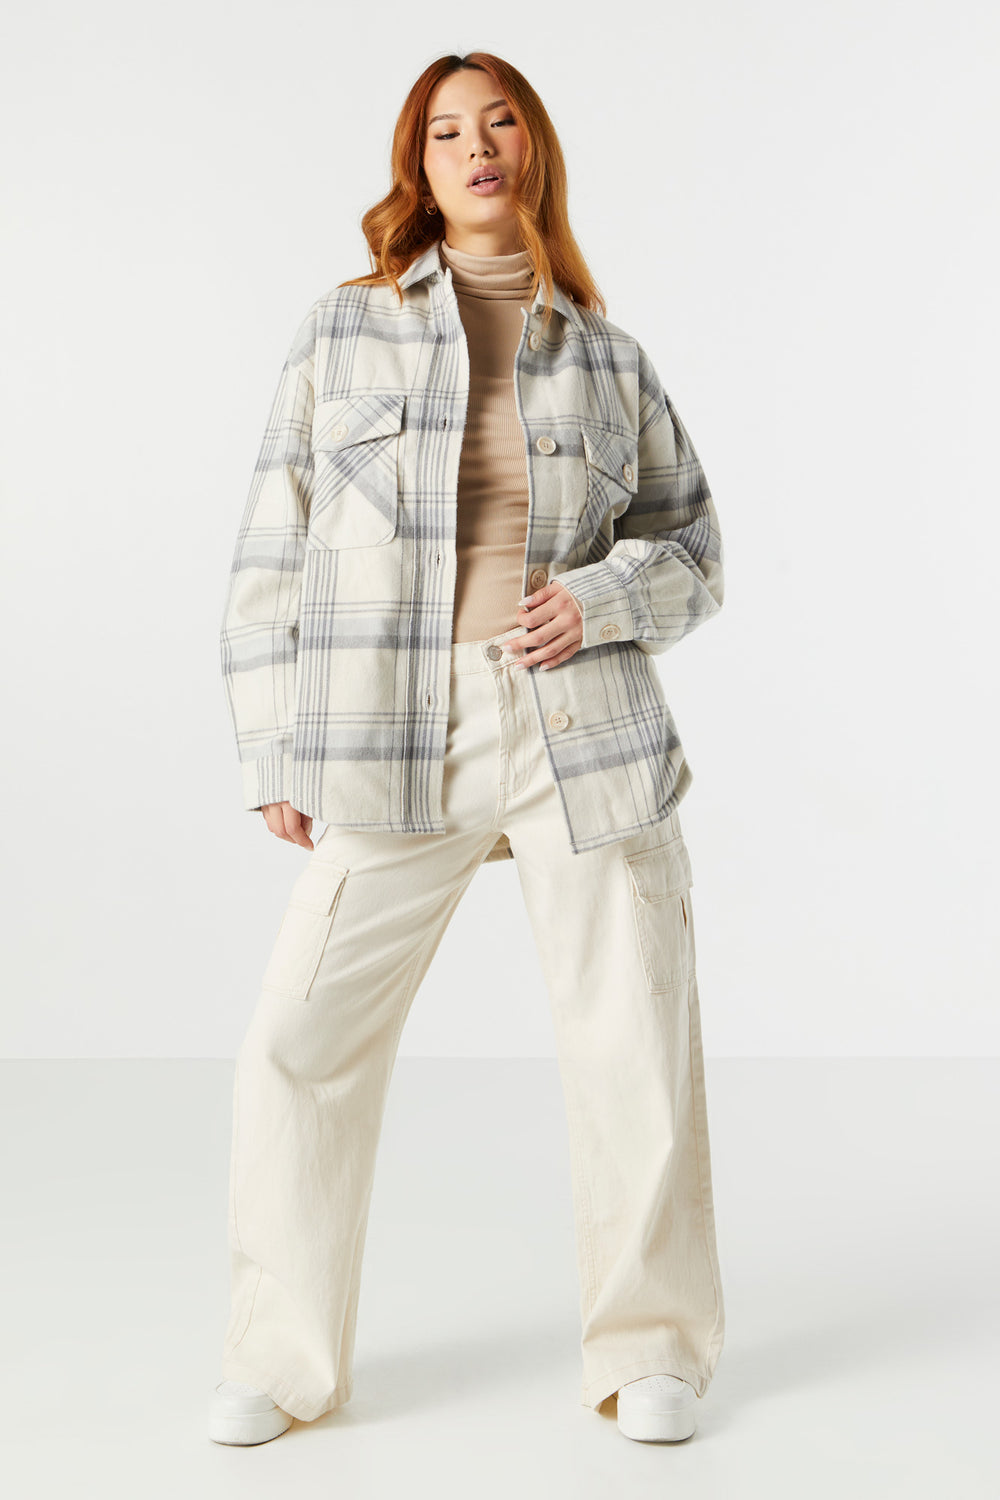 Grey and Blue Plaid Sherpa Flannel Grey and Blue Plaid Sherpa Flannel 23